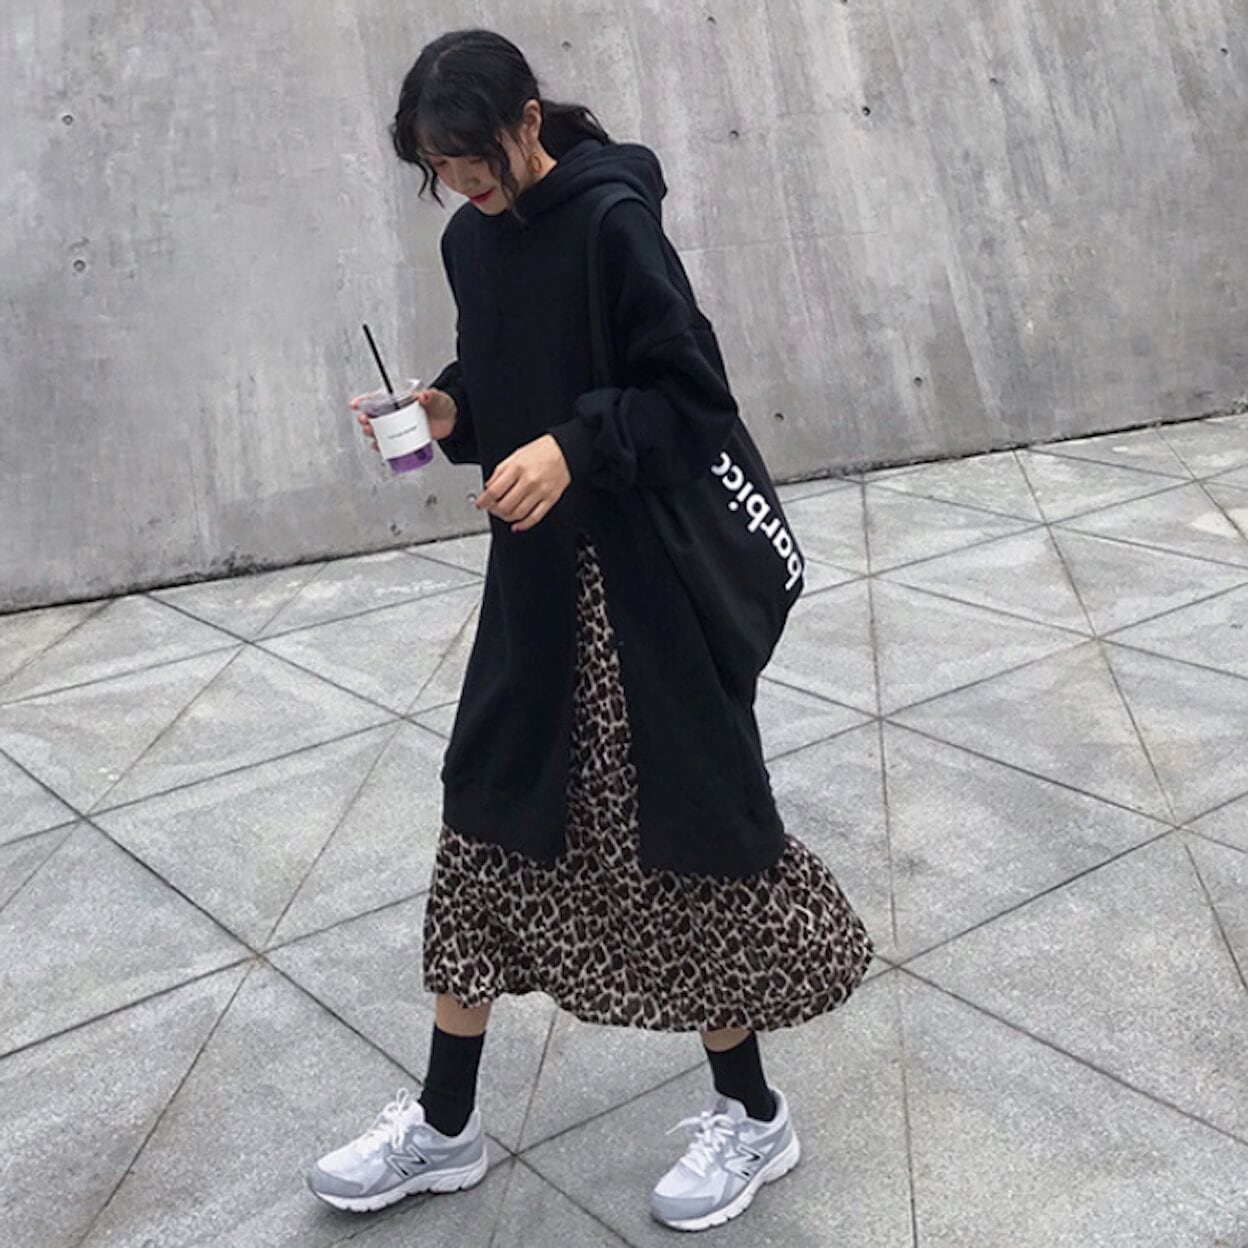 Womens Layered Look Hoodie with Leopard Print Dress